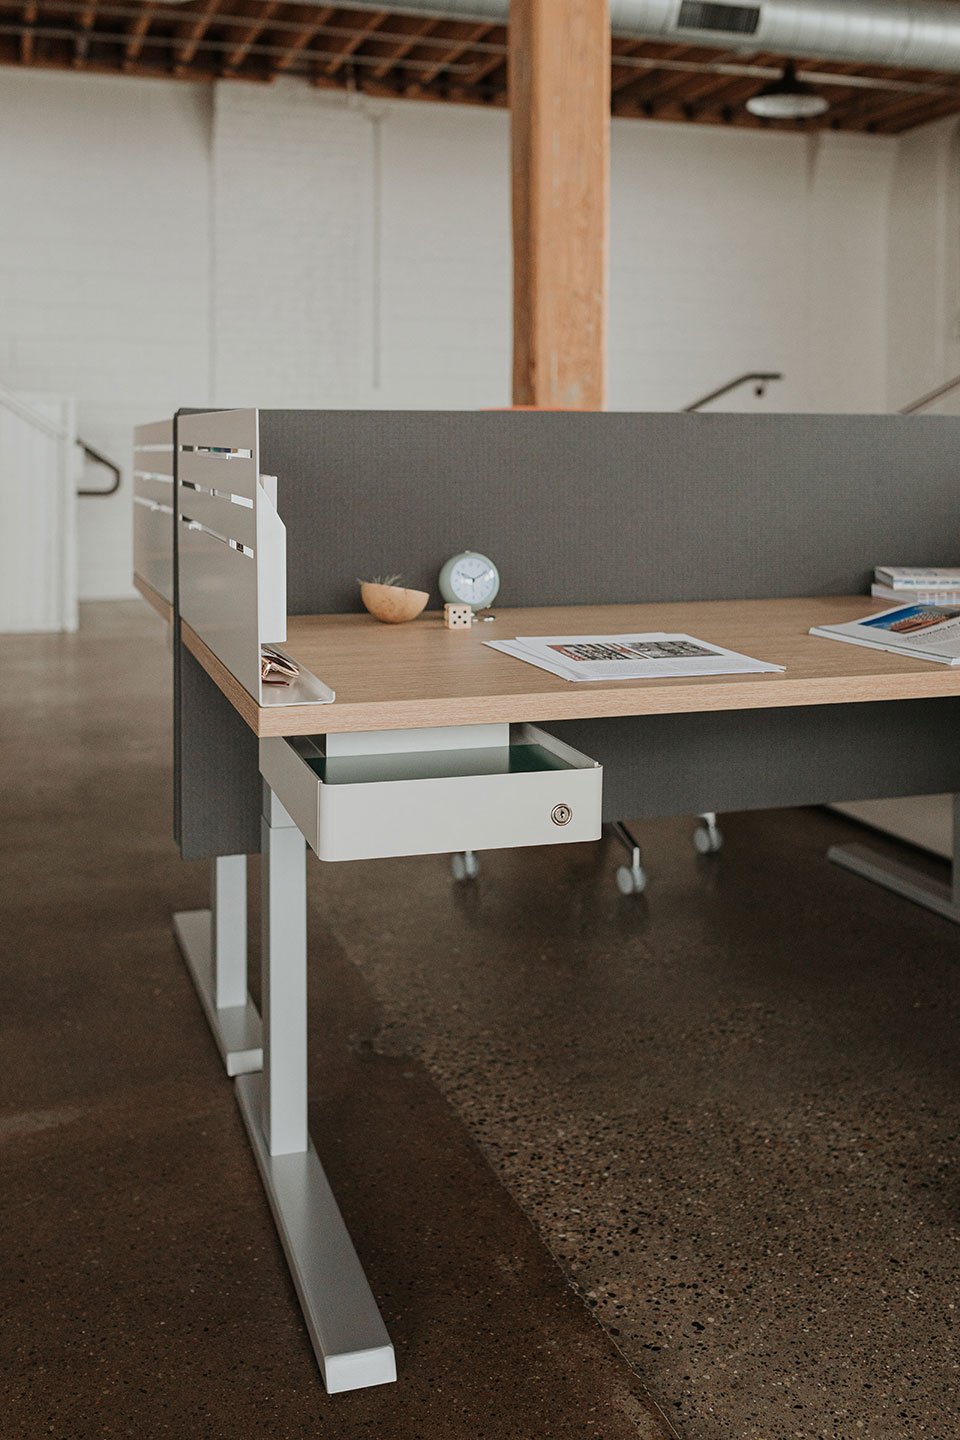 Haworth Upside Height Adjustable Table in an office setting with paper and a book on the table